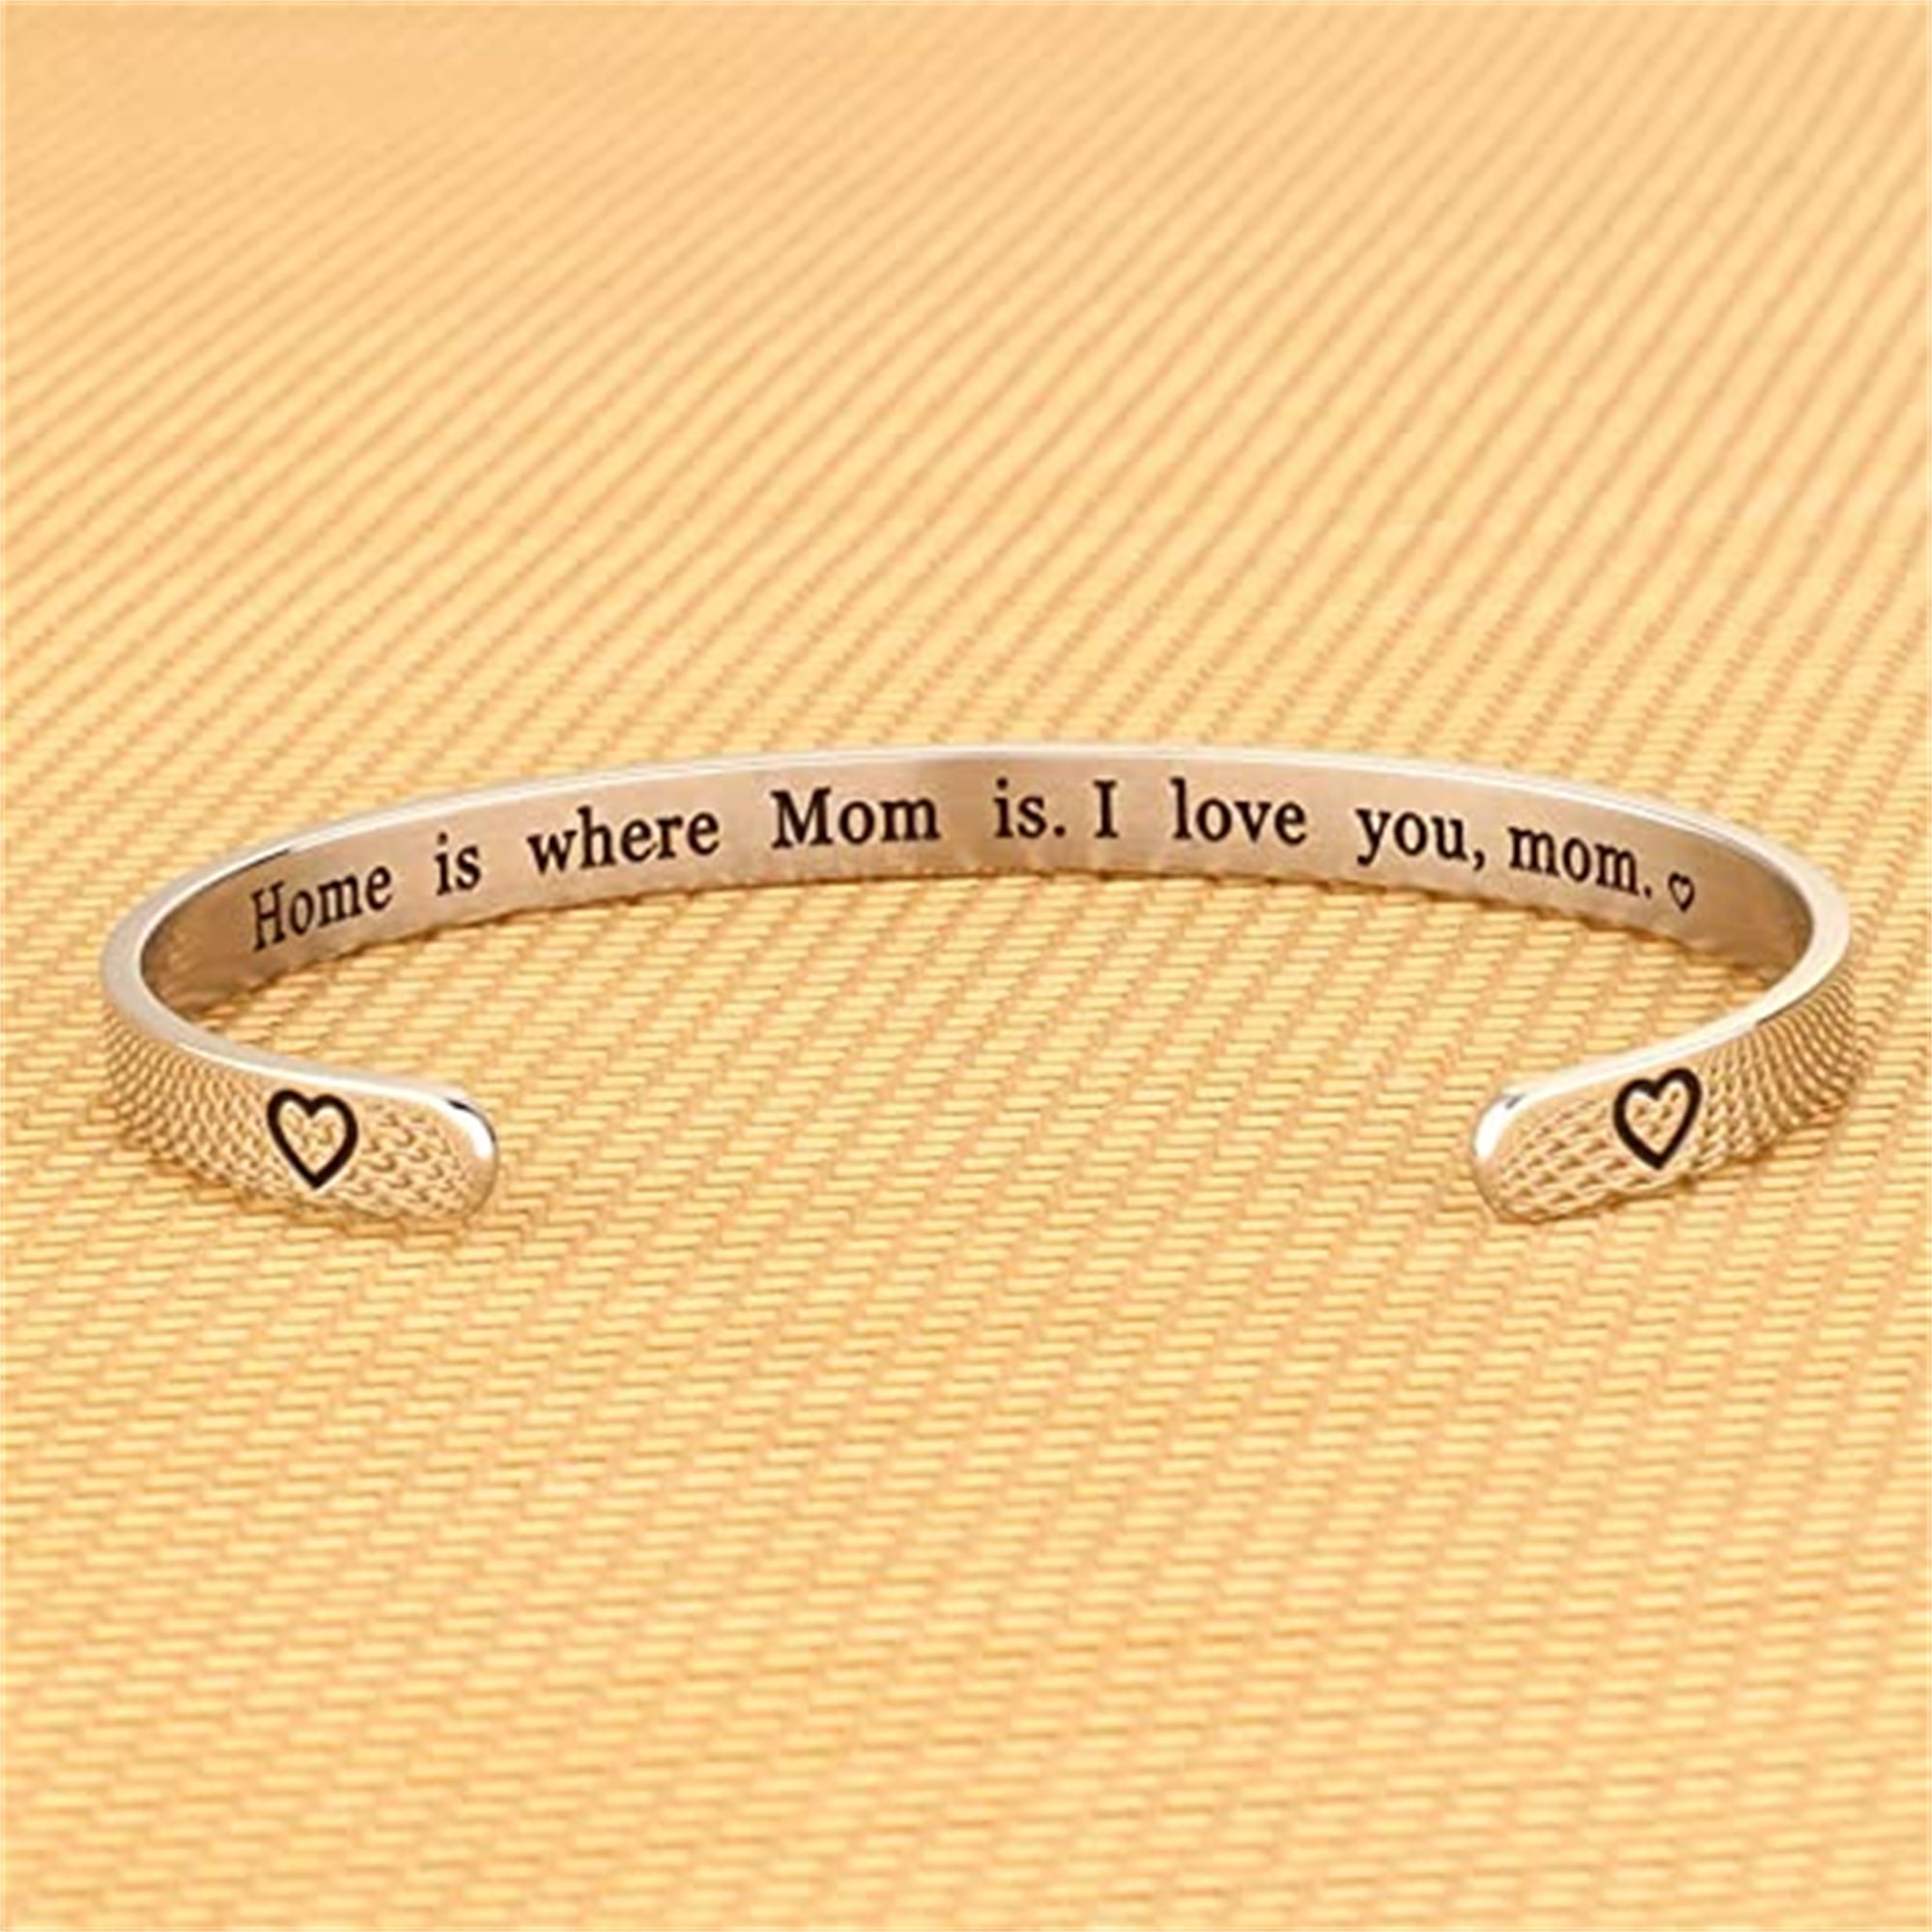 Yiyang Bracelets for Women Inspirational Stainless Steel Bar Wrap Bangle Cuff Personalized Birthday Gifts 